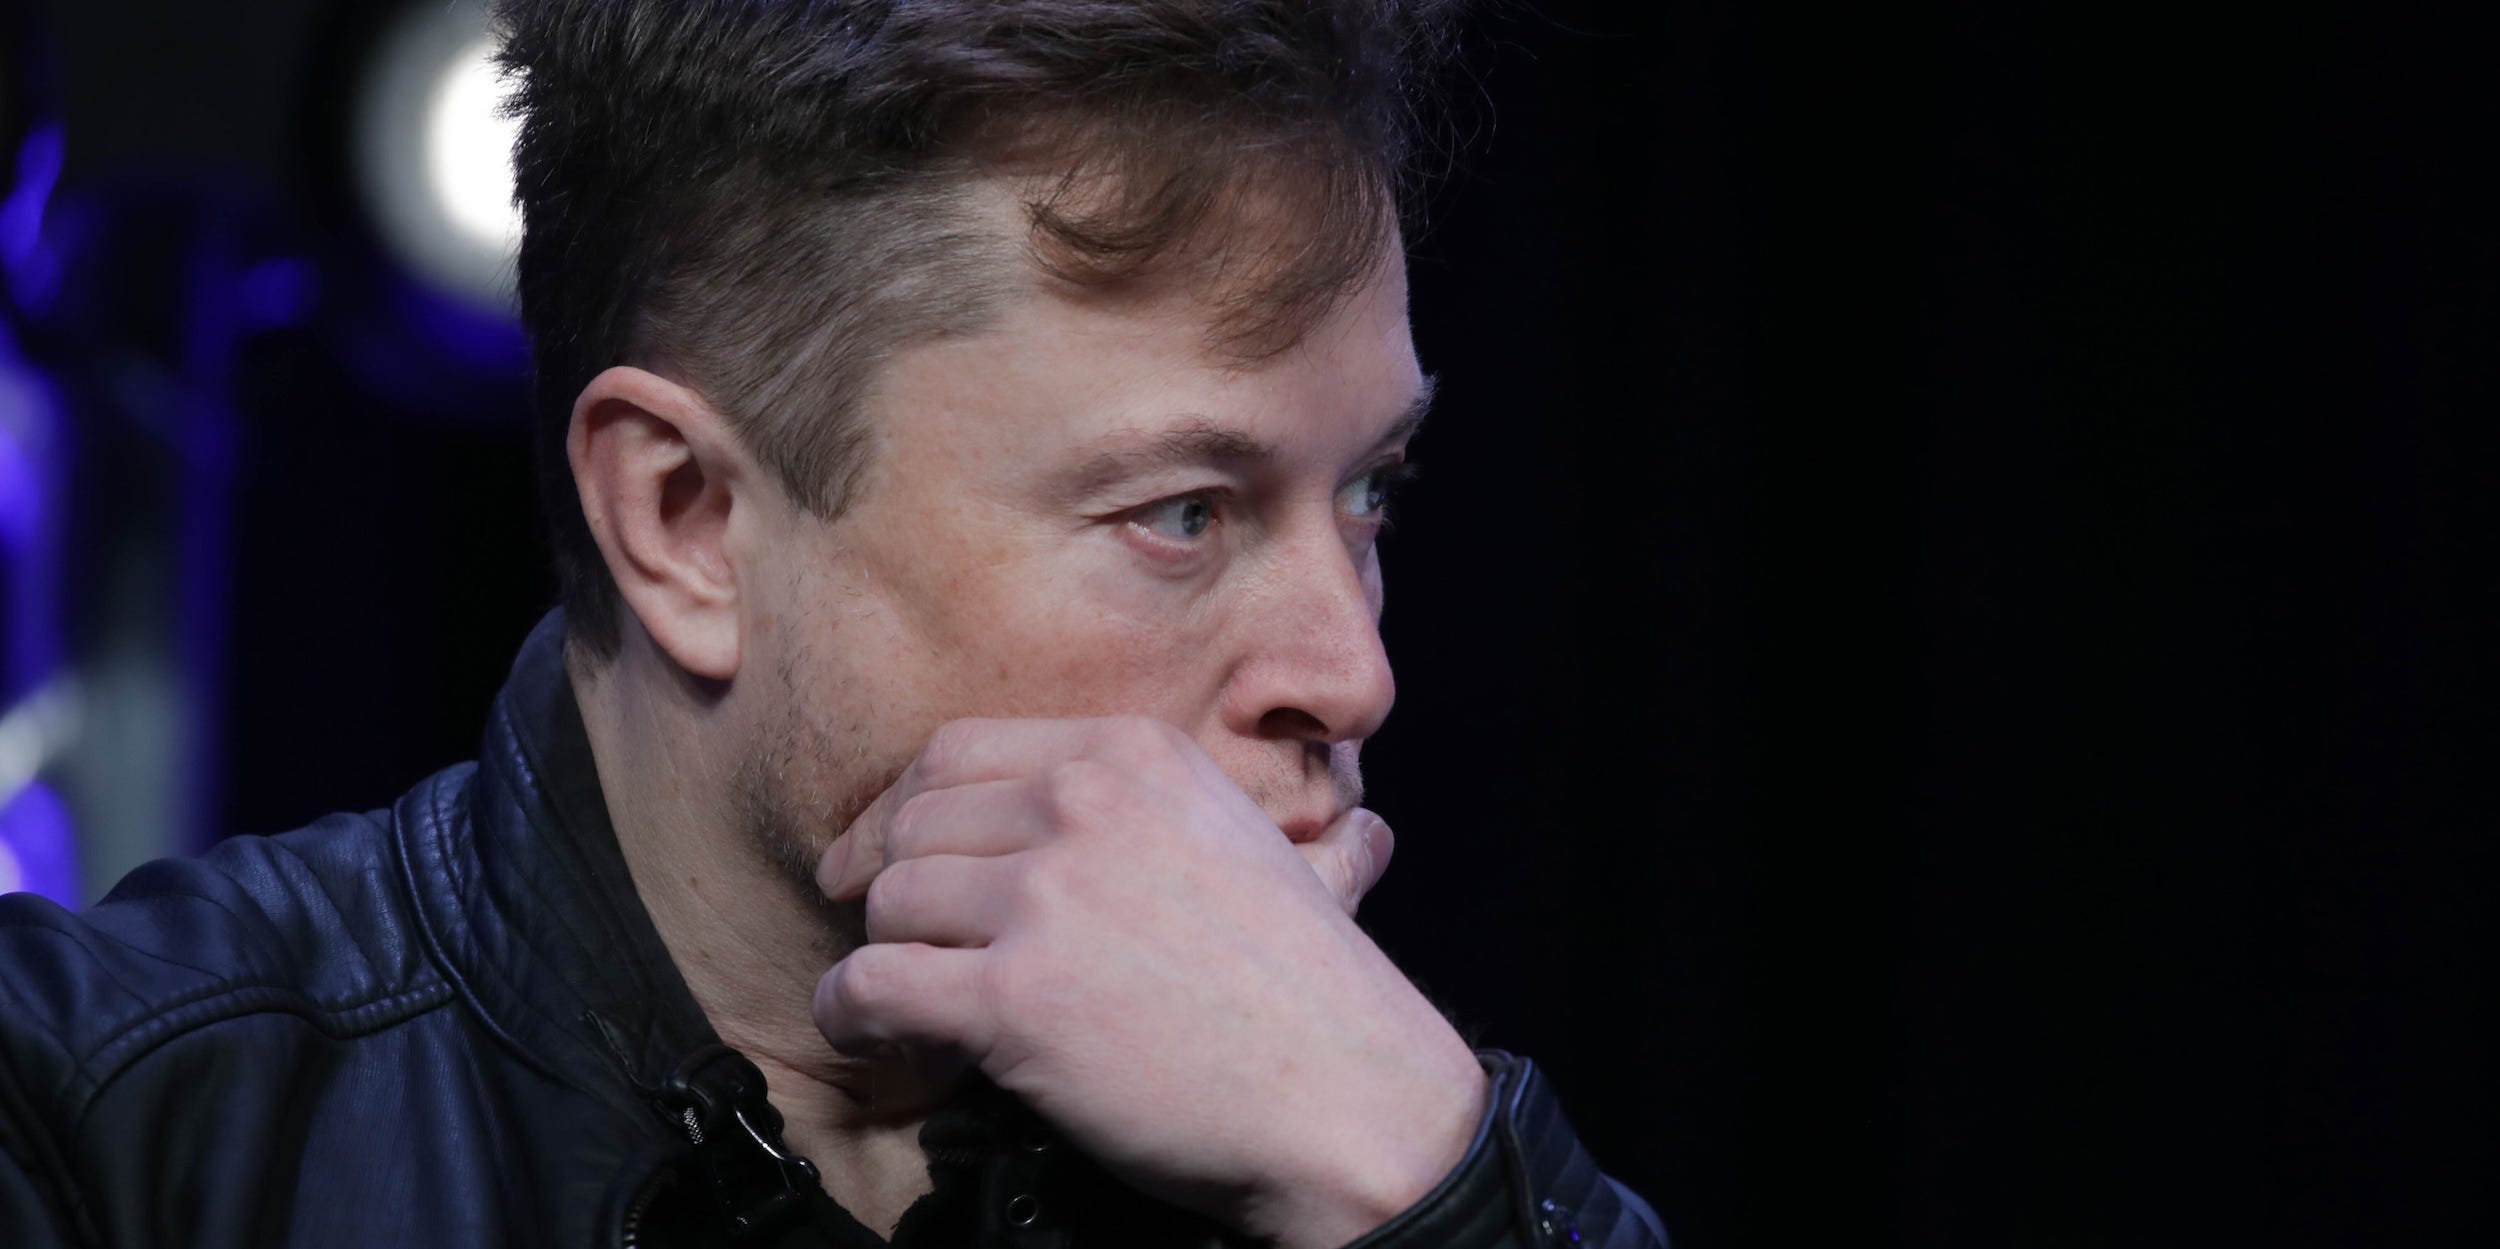 Elon Musk illegally ‘threatened’ to retaliate against workers and Tesla repeatedly violated labor laws, NLRB says